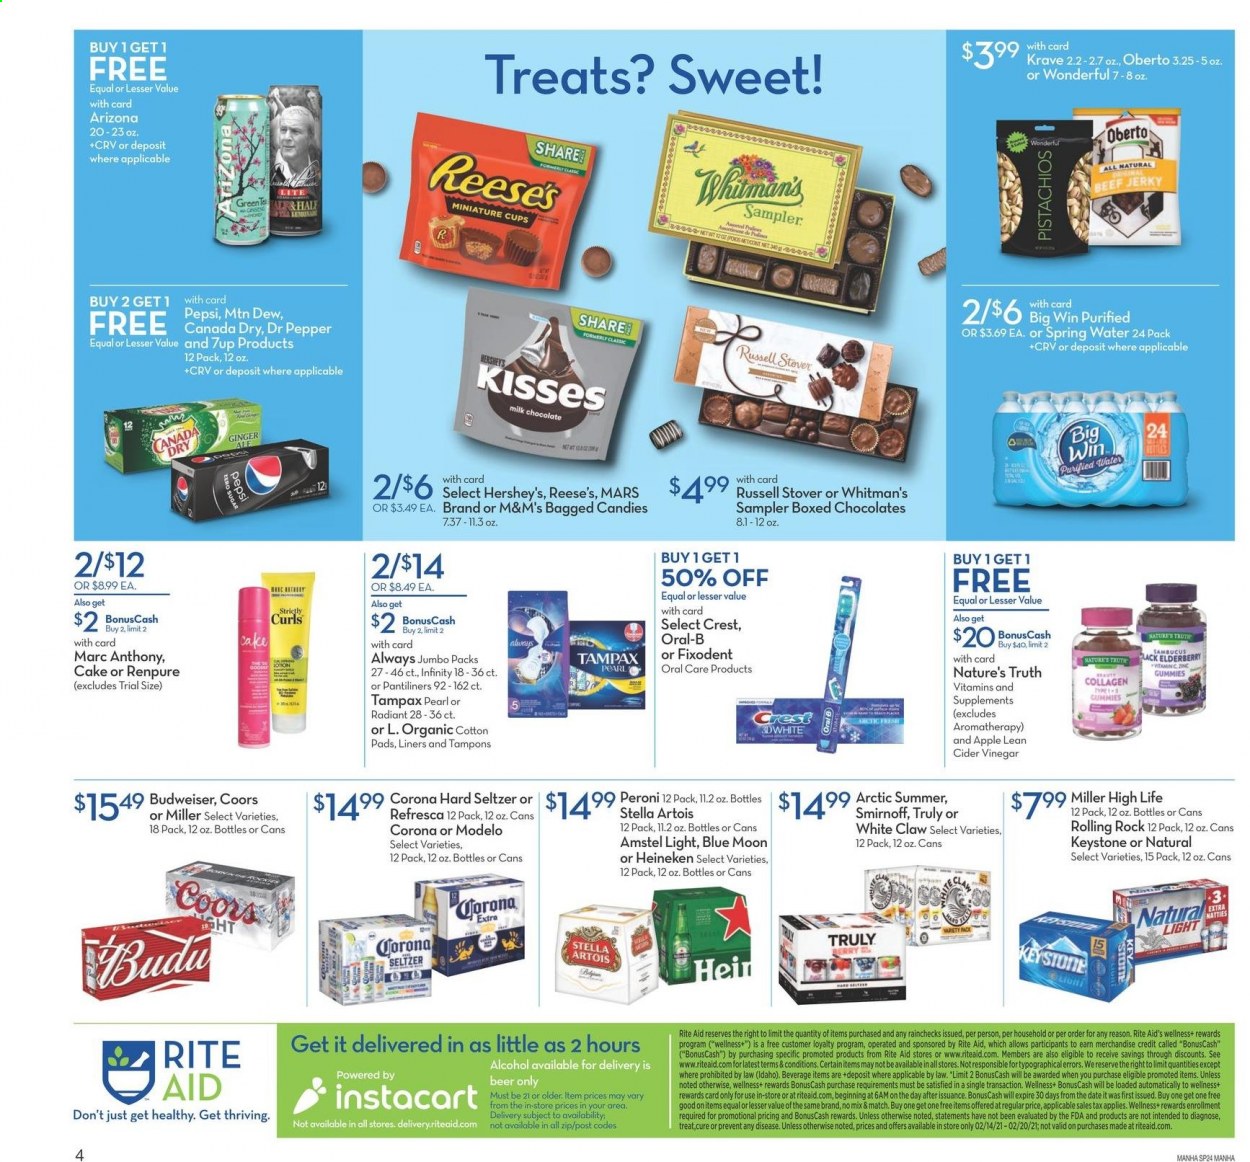 thumbnail - RITE AID Flyer - 02/14/2021 - 02/20/2021 - Sales products - beef jerky, jerky, milk, Reese's, Hershey's, chocolate, Mars, M&M's, apple cider vinegar, vinegar, pistachios, Canada Dry, ginger ale, Mountain Dew, Pepsi, Dr. Pepper, 7UP, AriZona, seltzer water, spring water, alcohol, apple cider, Smirnoff, White Claw, Hard Seltzer, TRULY, beer, Budweiser, Stella Artois, Coors, Blue Moon, Corona Extra, Heineken, Peroni, Miller, Keystone, Modelo, Oral-B, Fixodent, Crest, Tampax, pantiliners, tampons, Infinity, cup, Nature's Truth. Page 2.